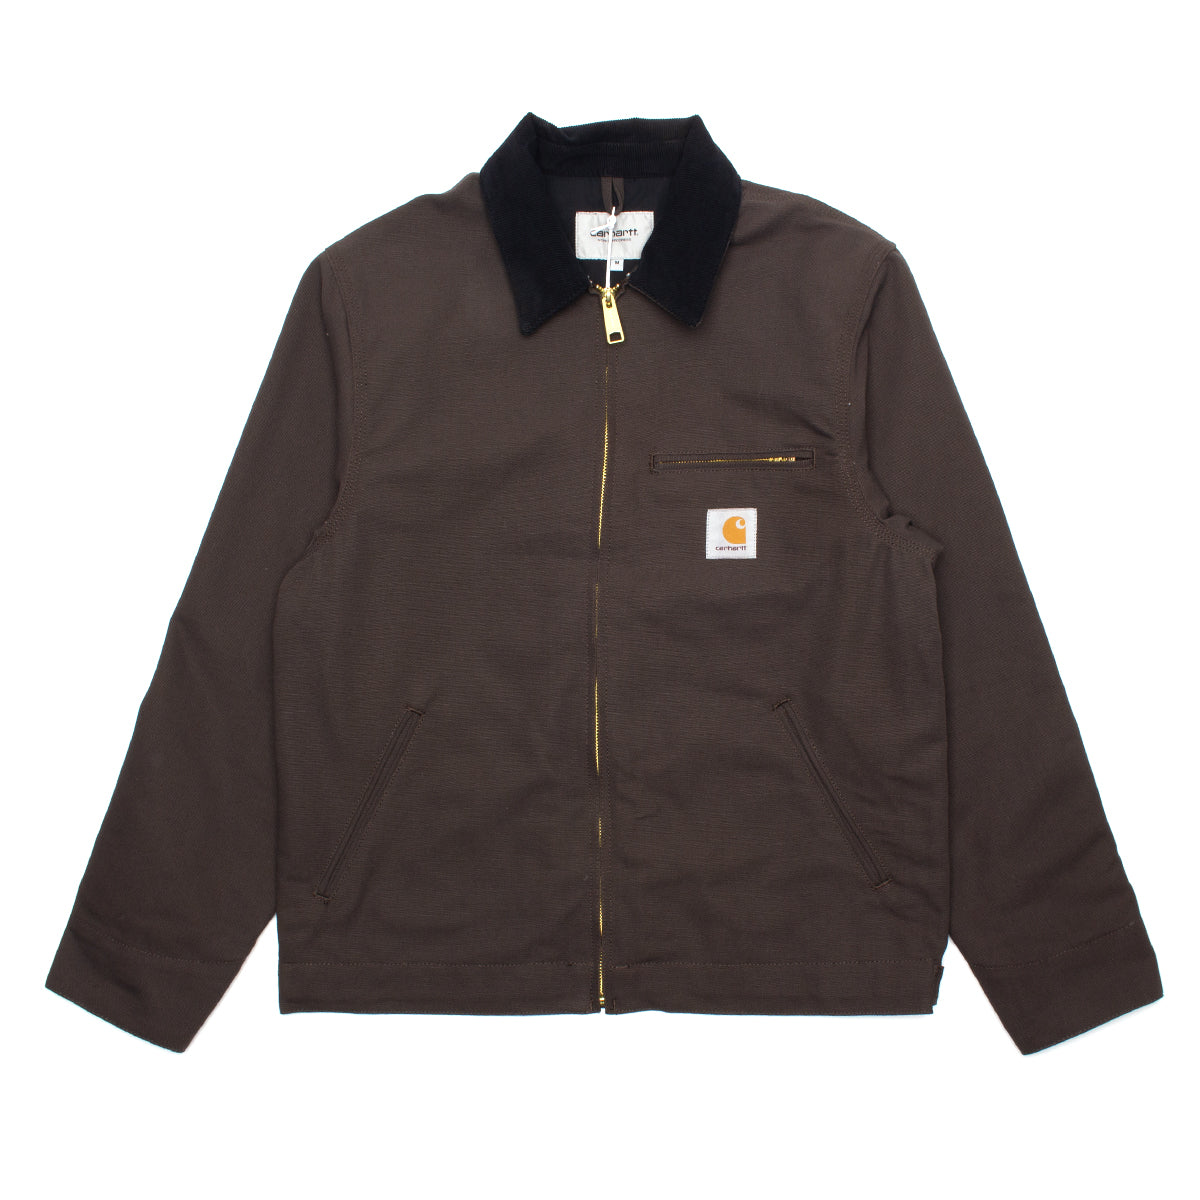 Carhartt WIP | Detroit Jacket Style # I032940-1YL Color : Tobacco / Black